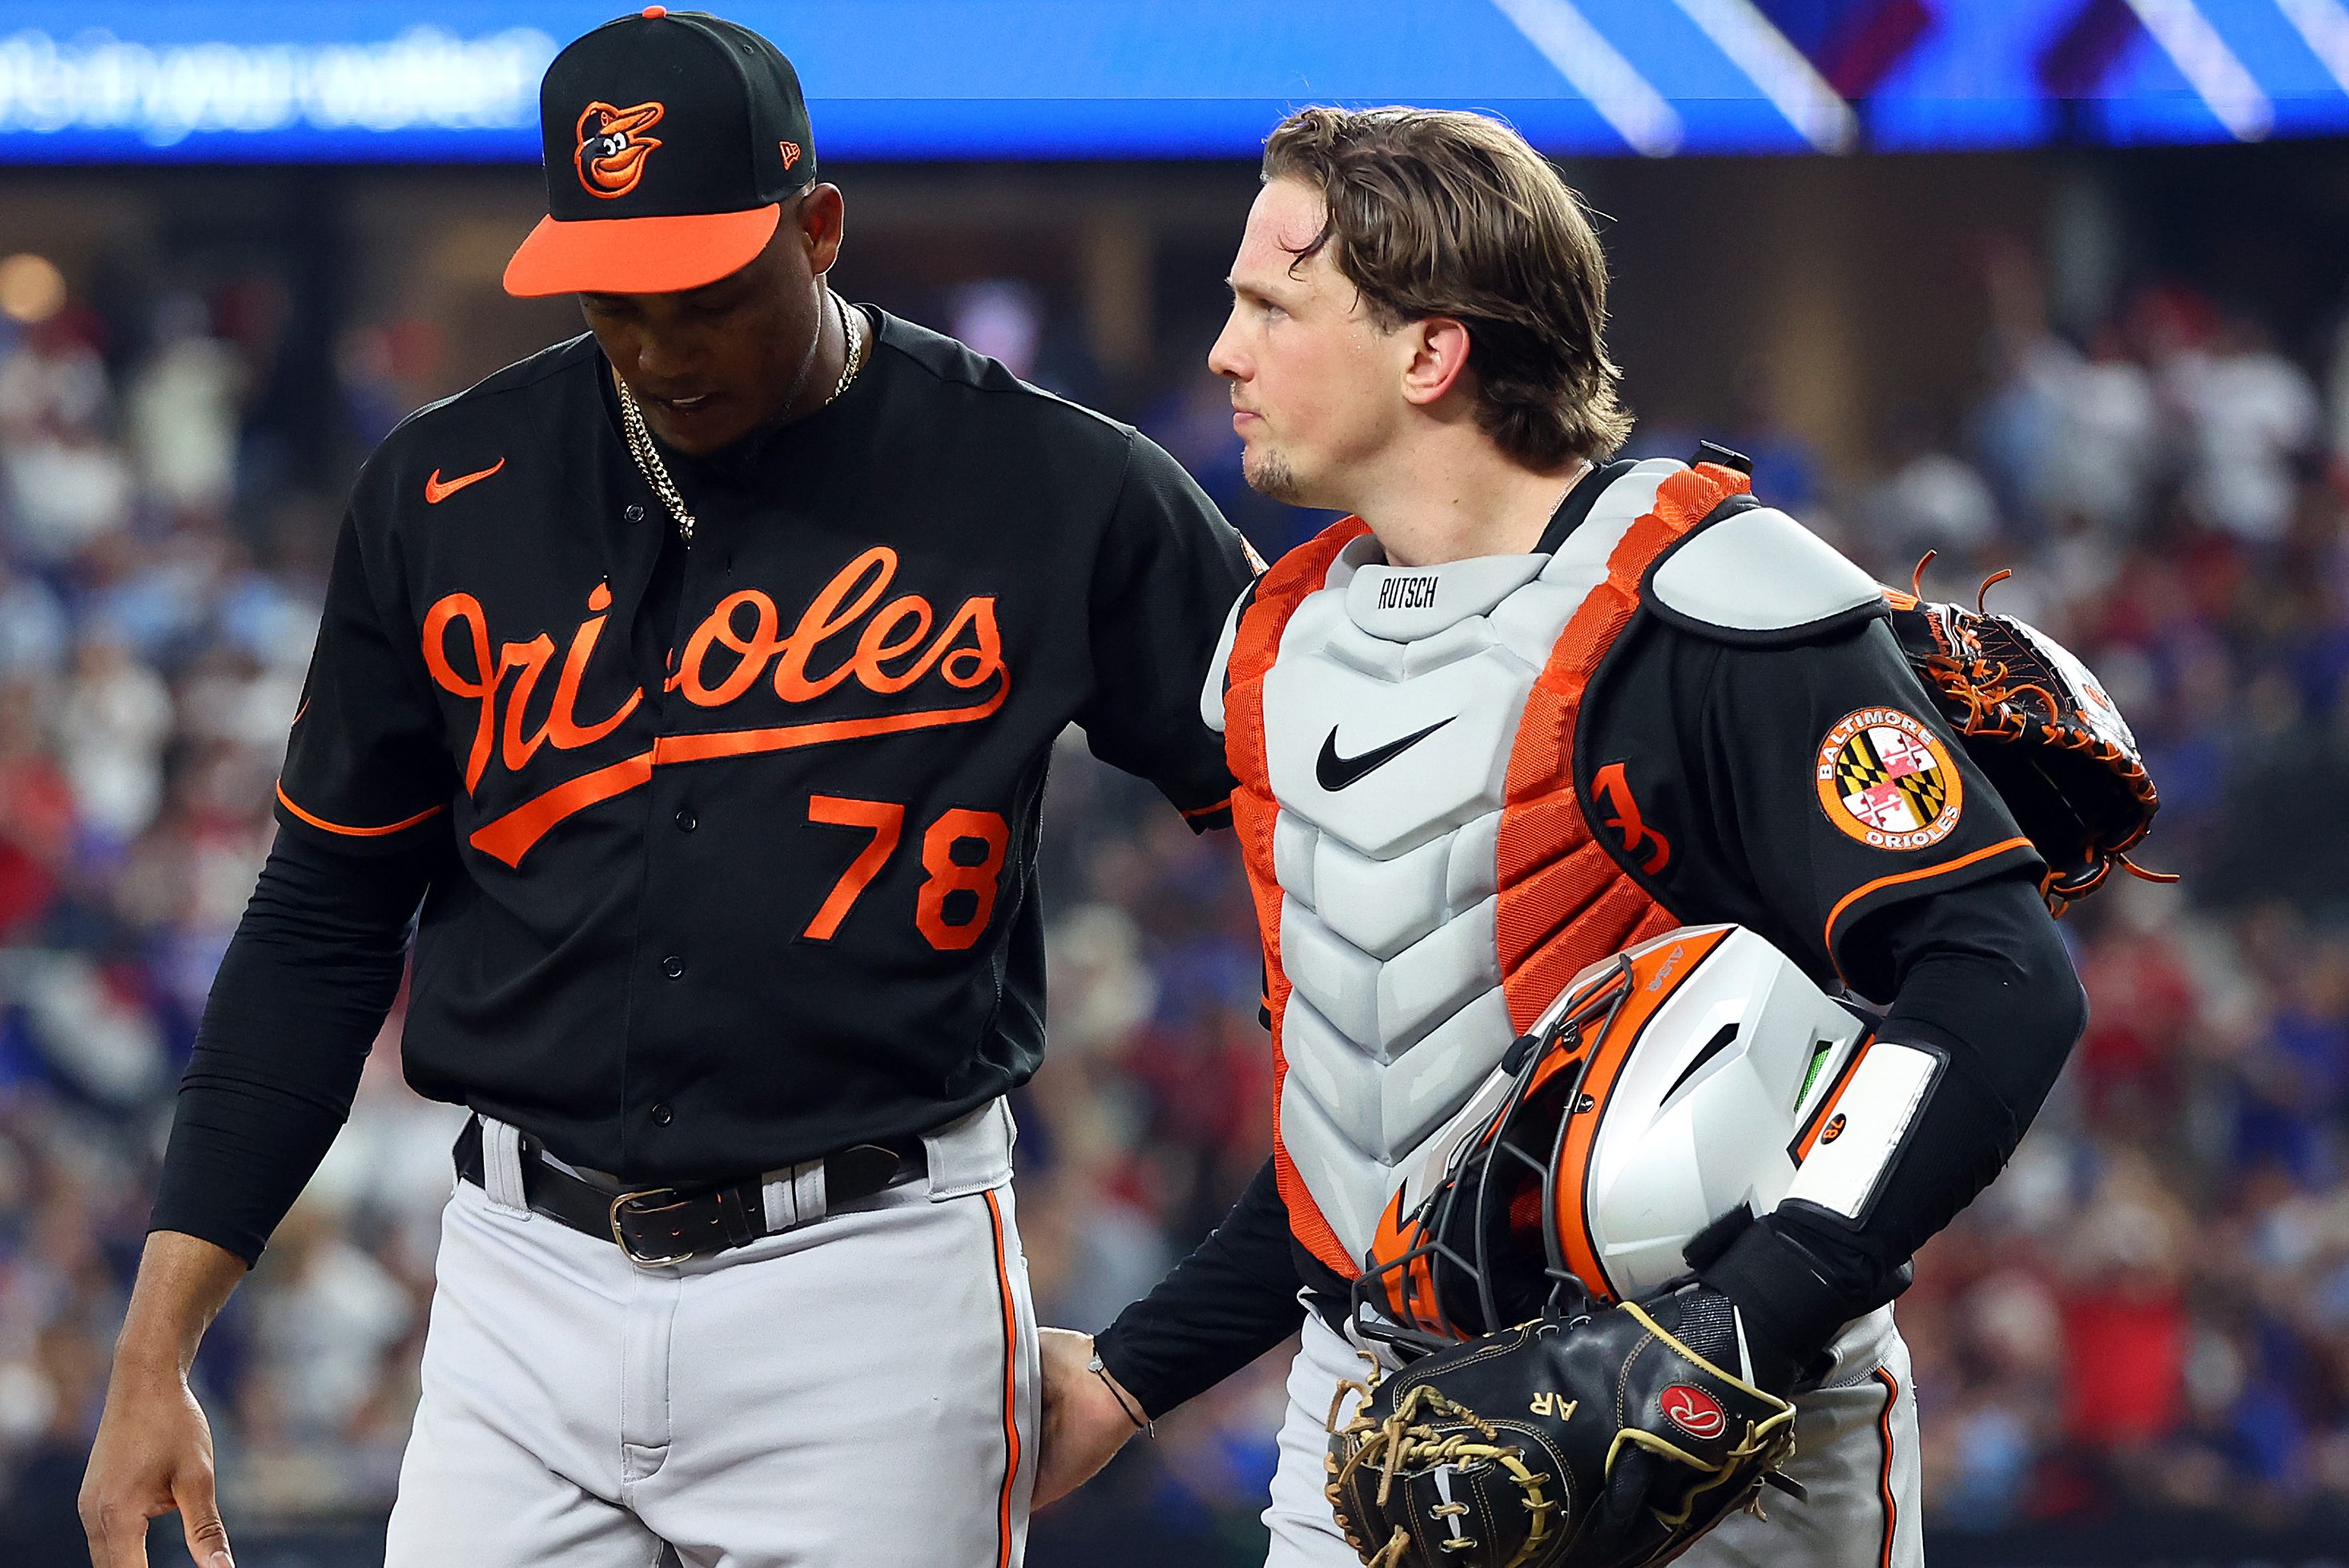 Baltimore Orioles become the first U.S. pro sports team to wear